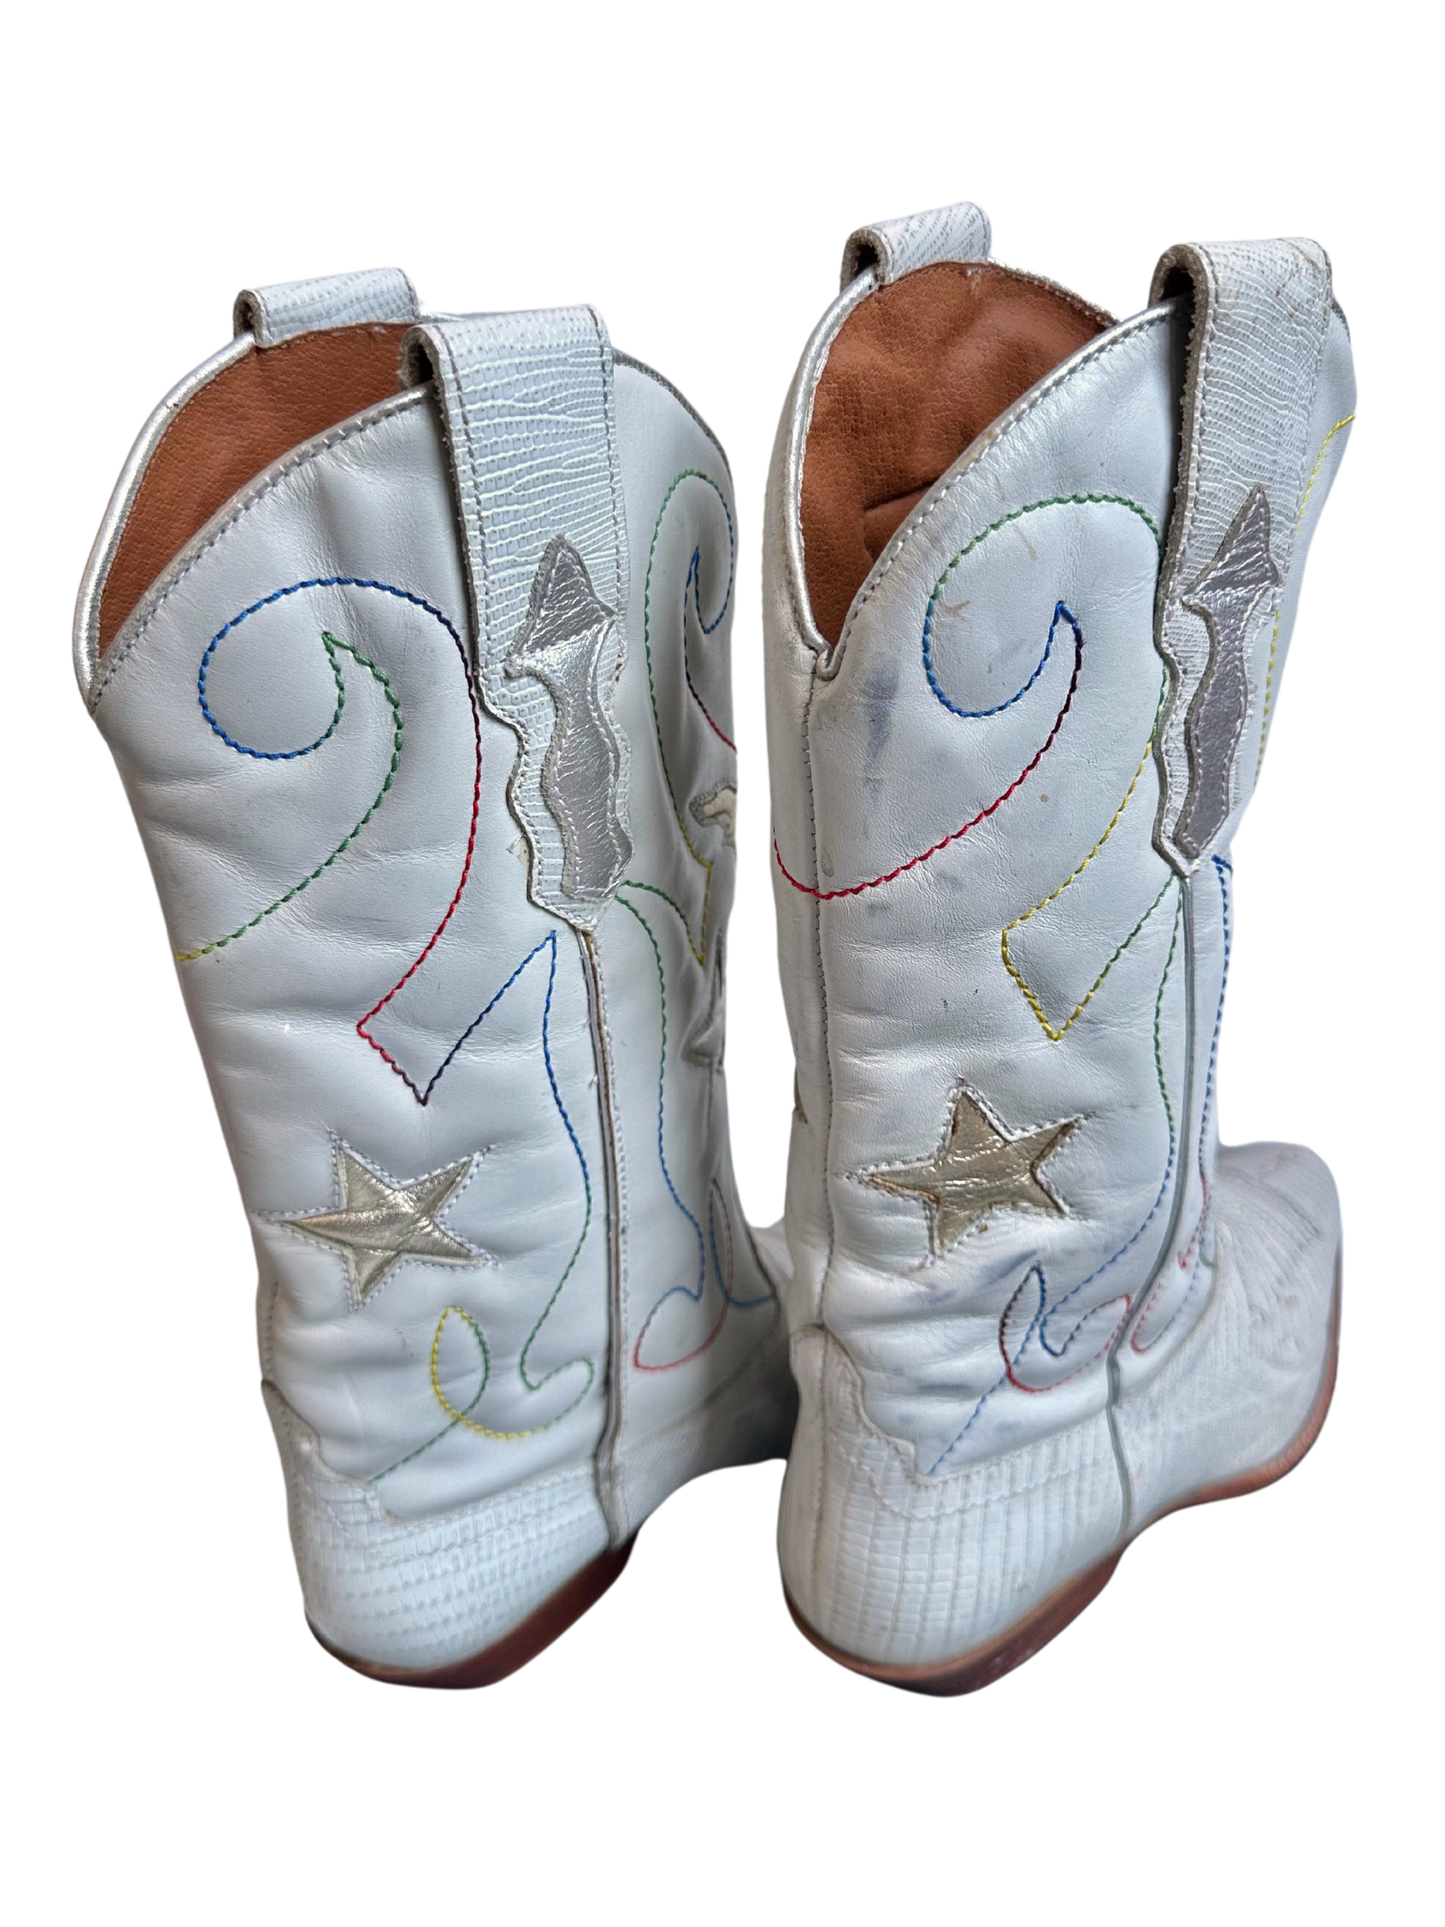 WHITE MULTI STITCH STEER COWBOY BOOTS SIZE 5